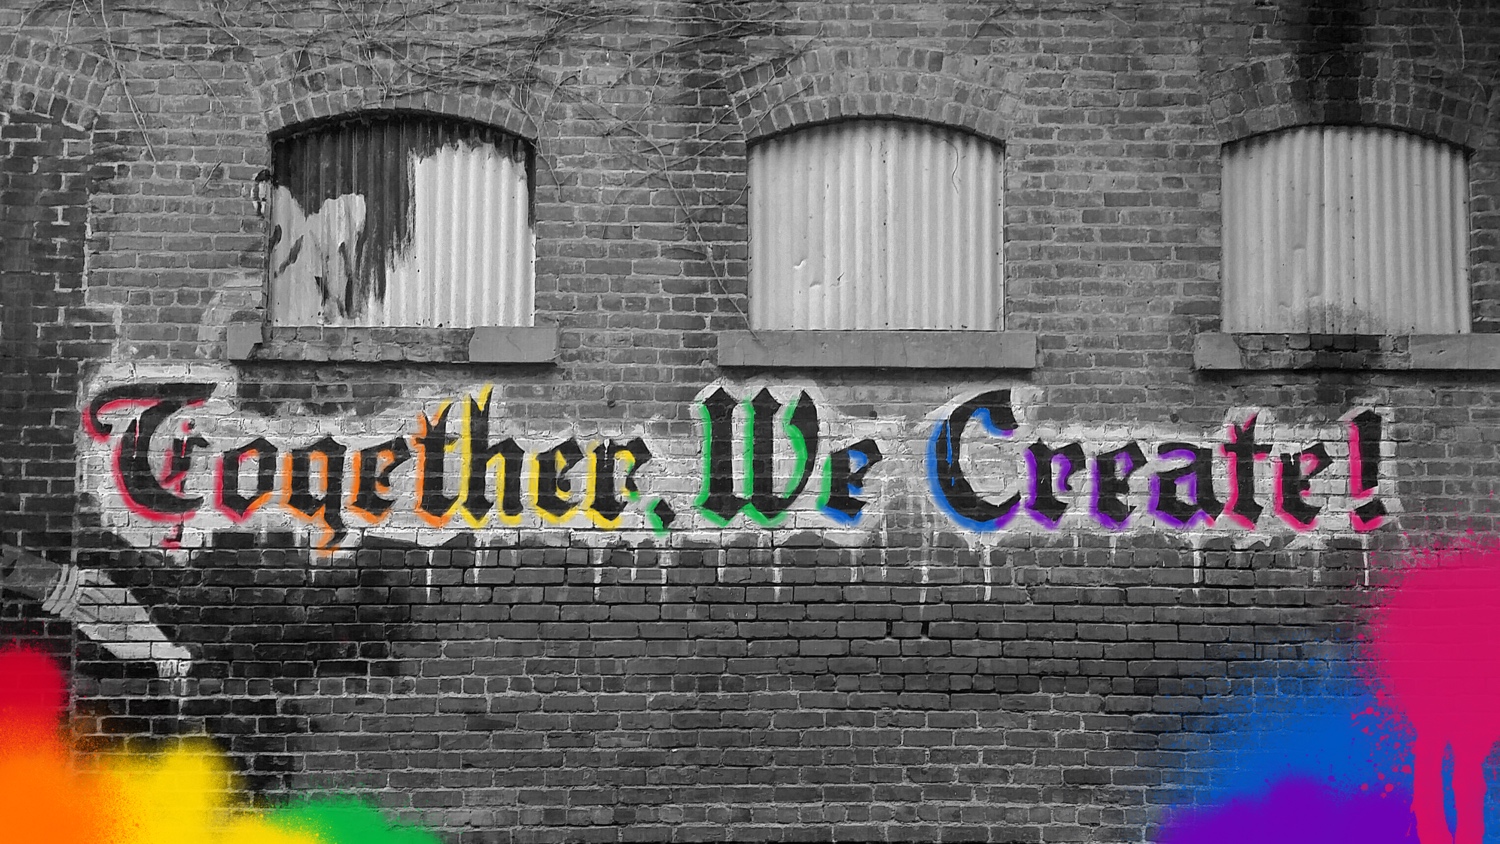 An industrial brick wall with rainbow graffiti that says together we create